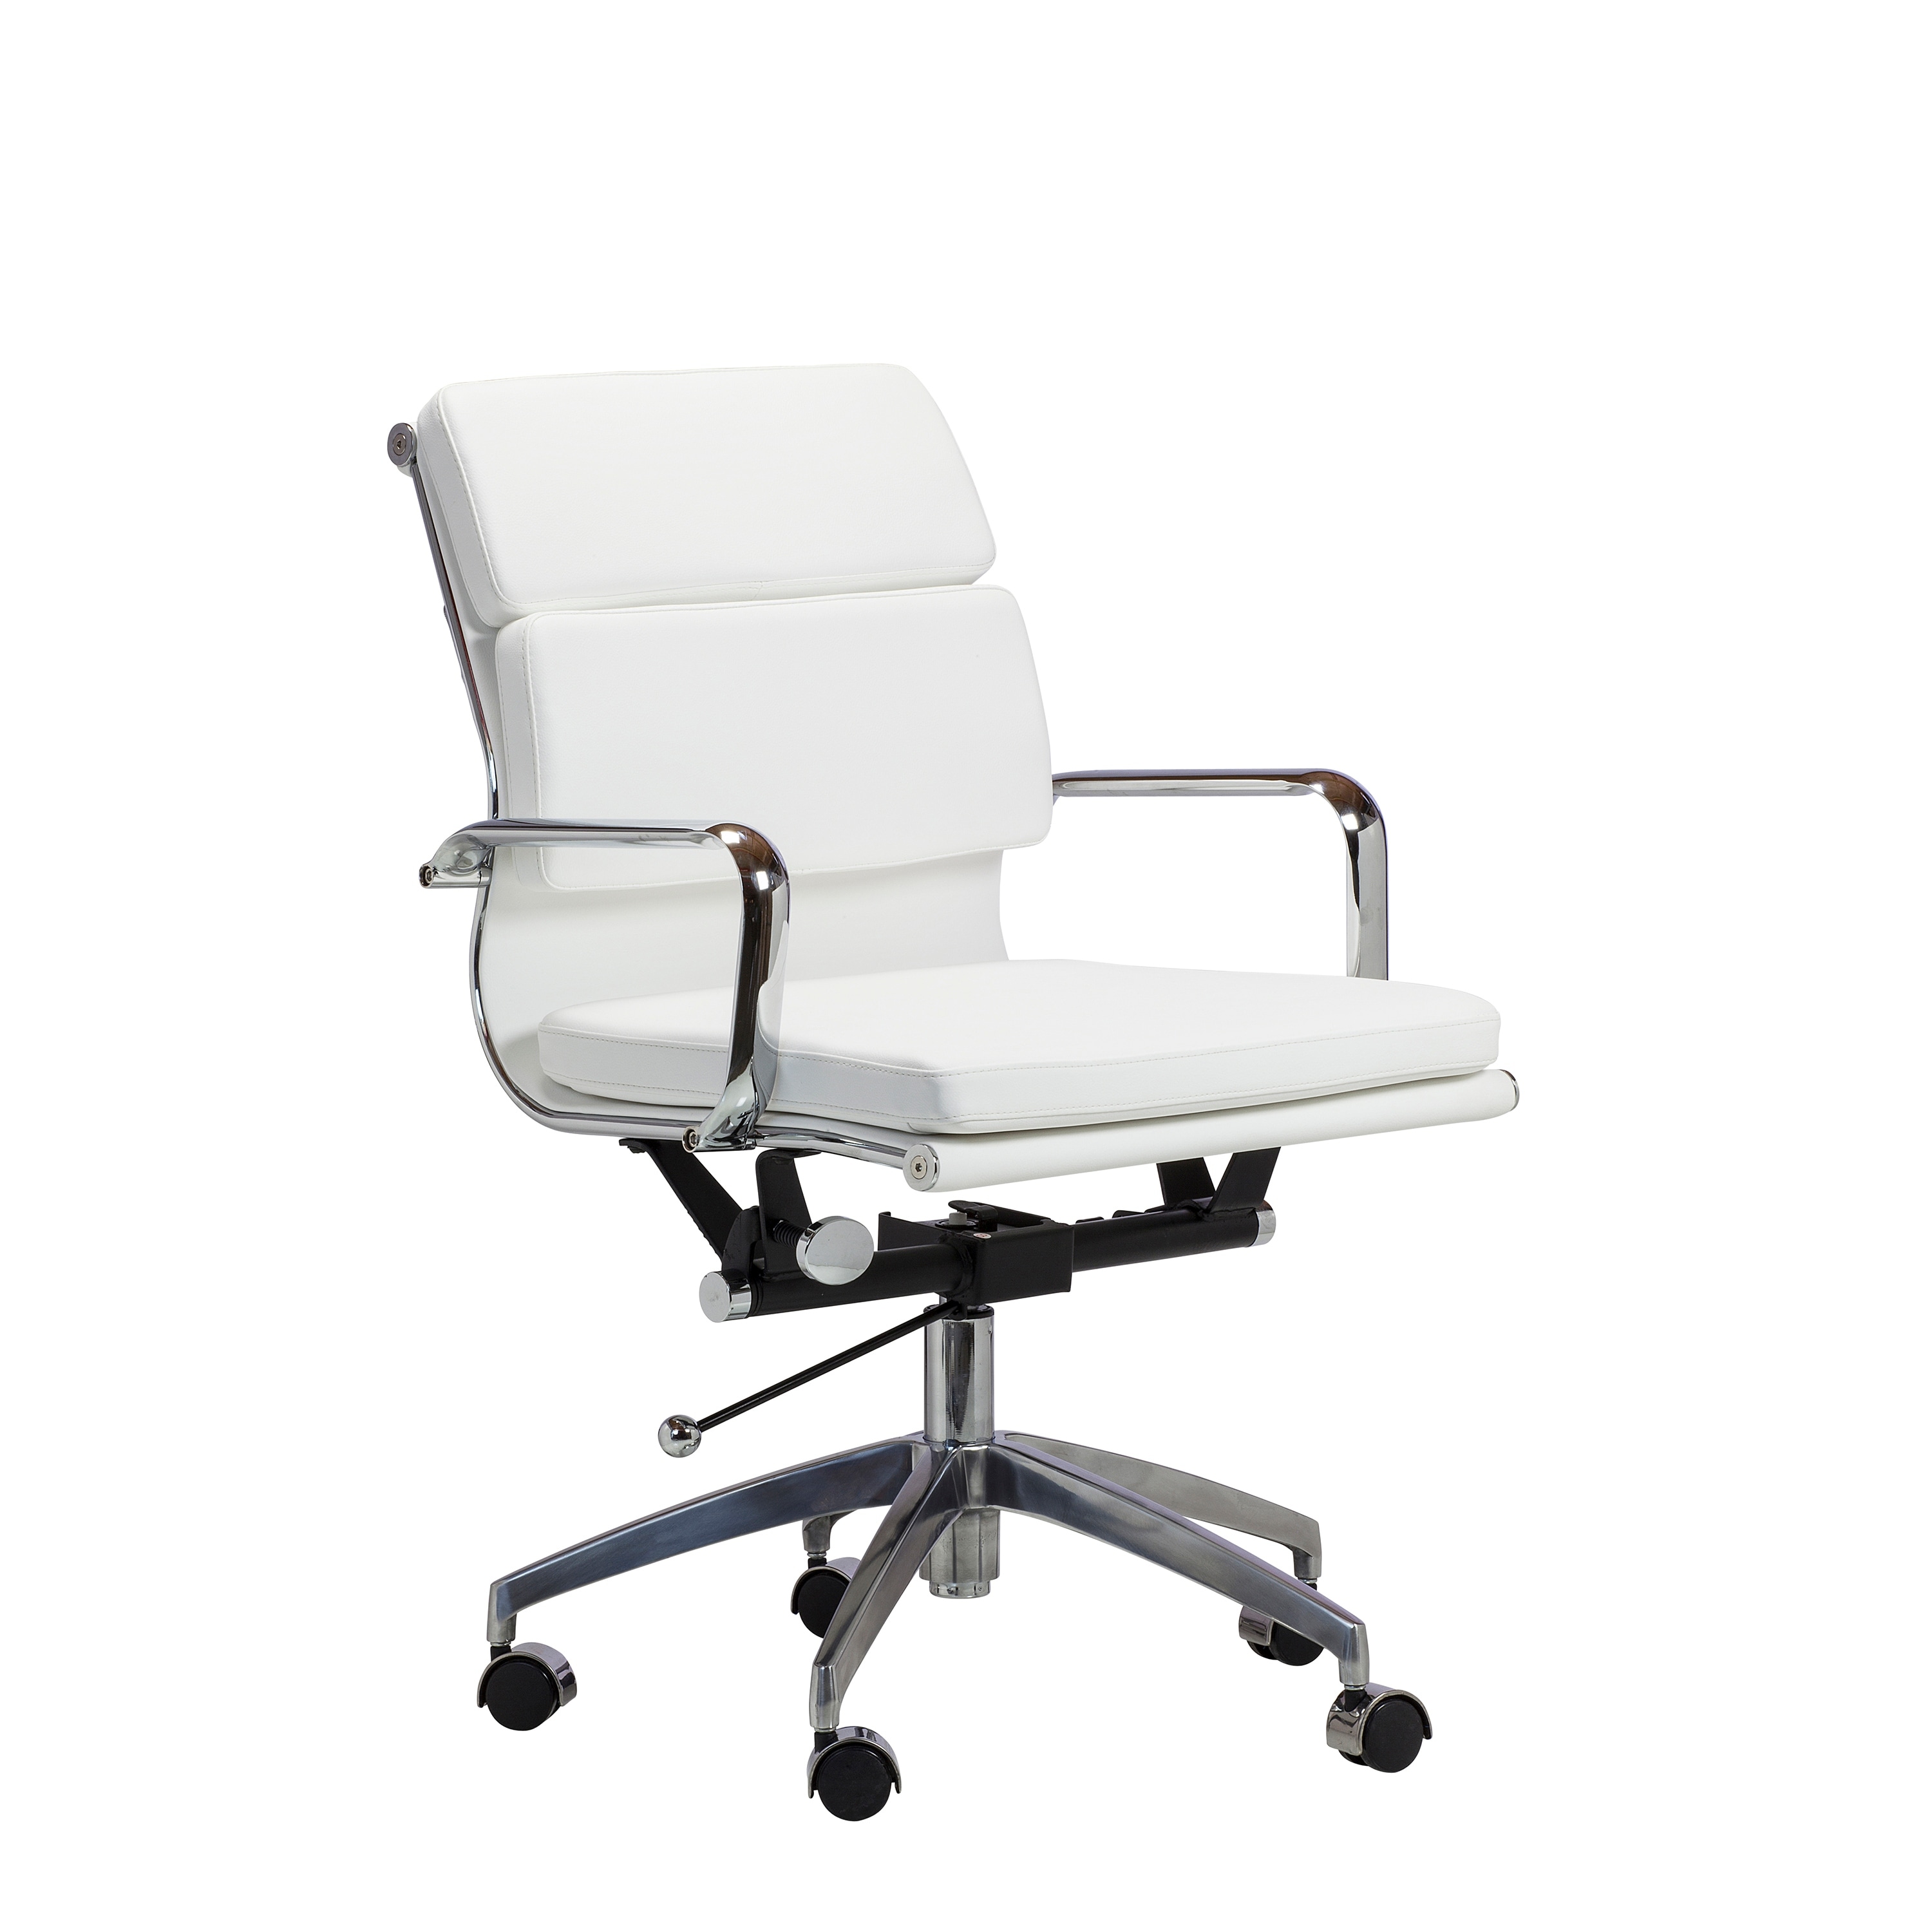 https://ak1.ostkcdn.com/images/products/is/images/direct/768eb5484a89ca6b8ec96ca85ee5ac12b50d75b4/White-Leather-Office-Chair.jpg